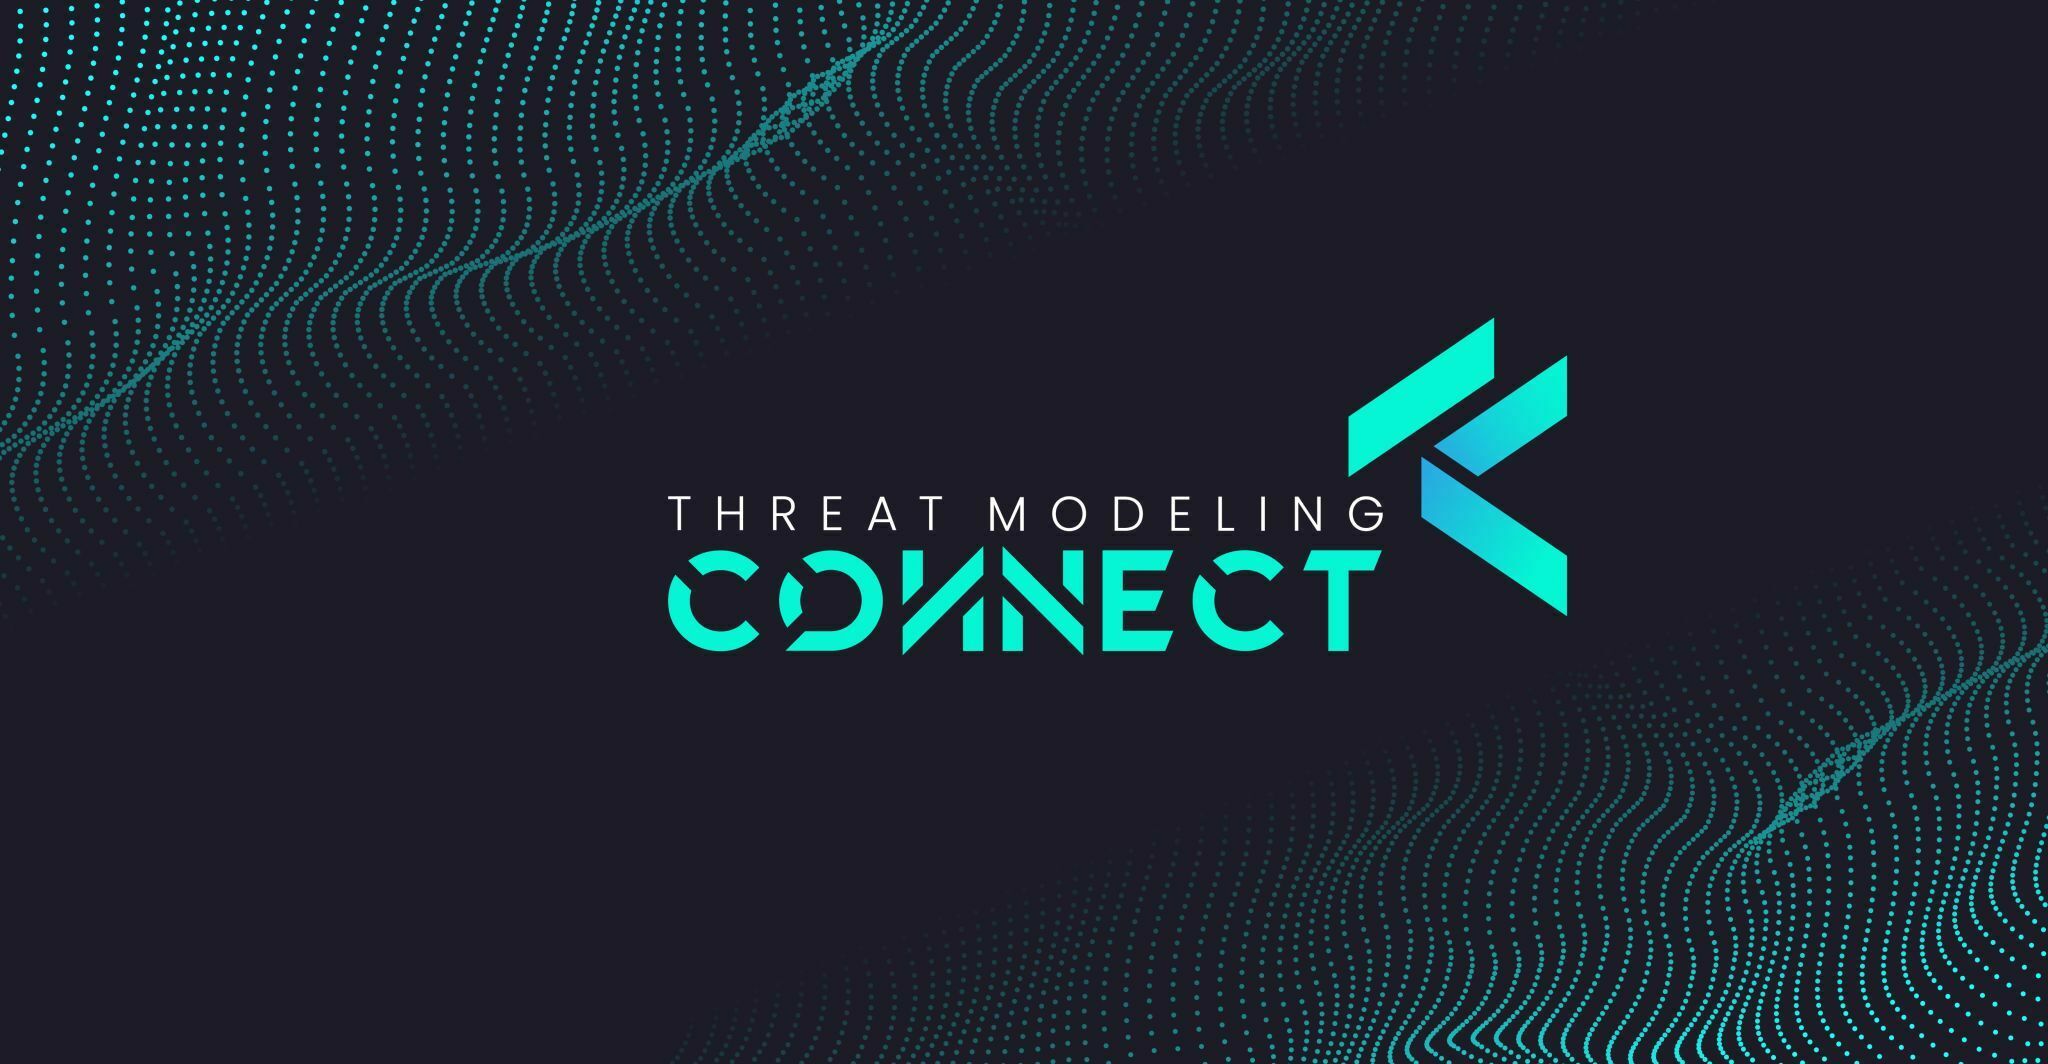 We are excited to announce the inaugural Threat Modeling Conference (ThreatModCon), an event for application security professionals, researchers, deve